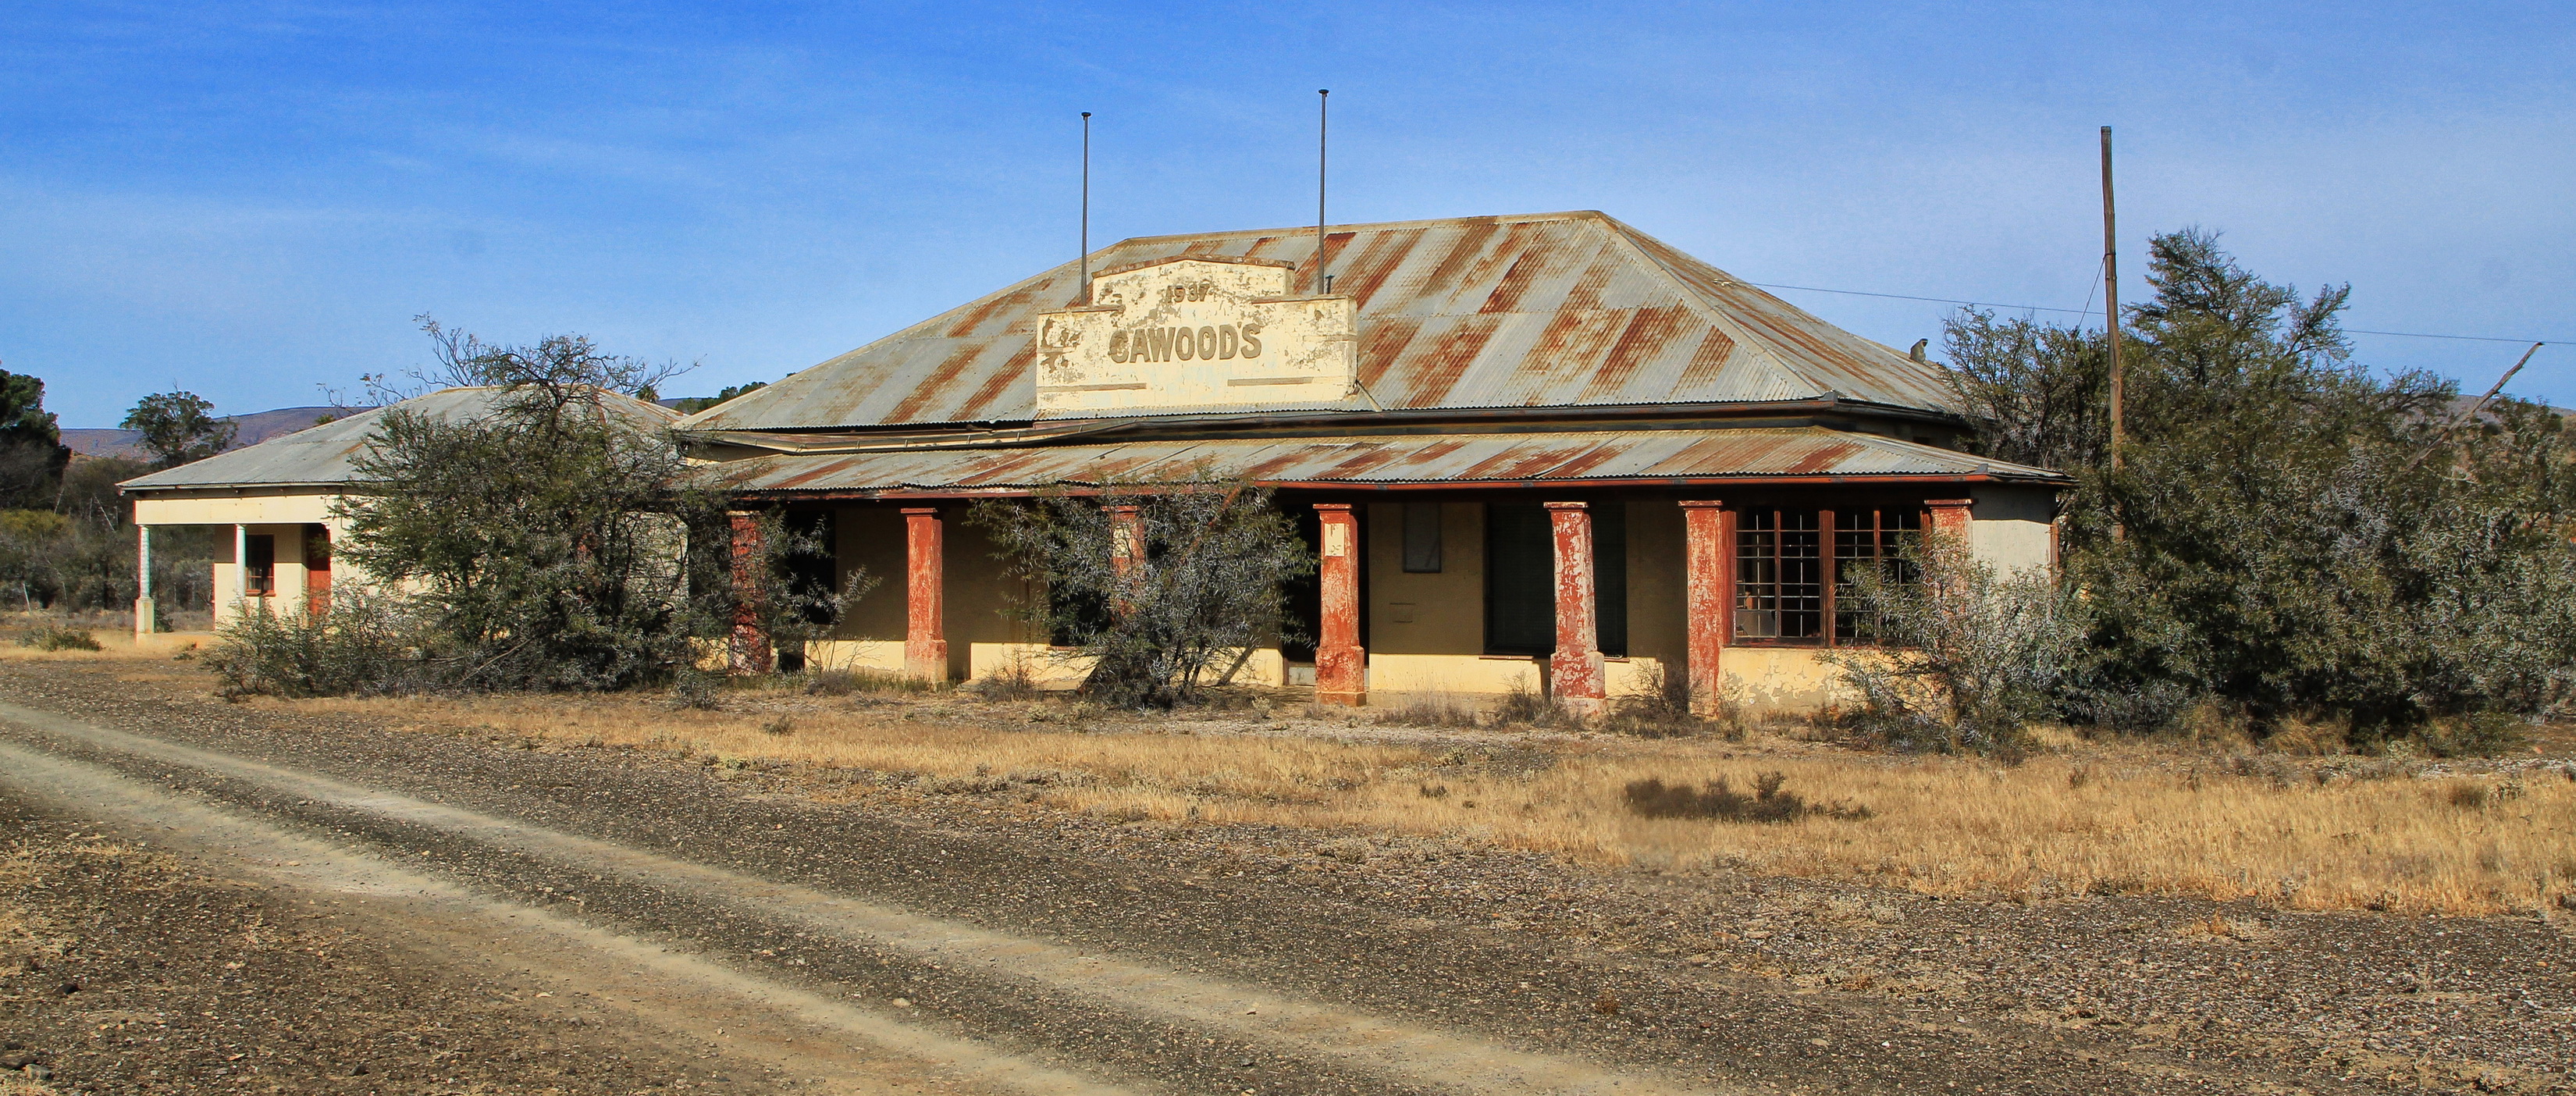 The old Cawood store at Mount Stewart Station, Karoo